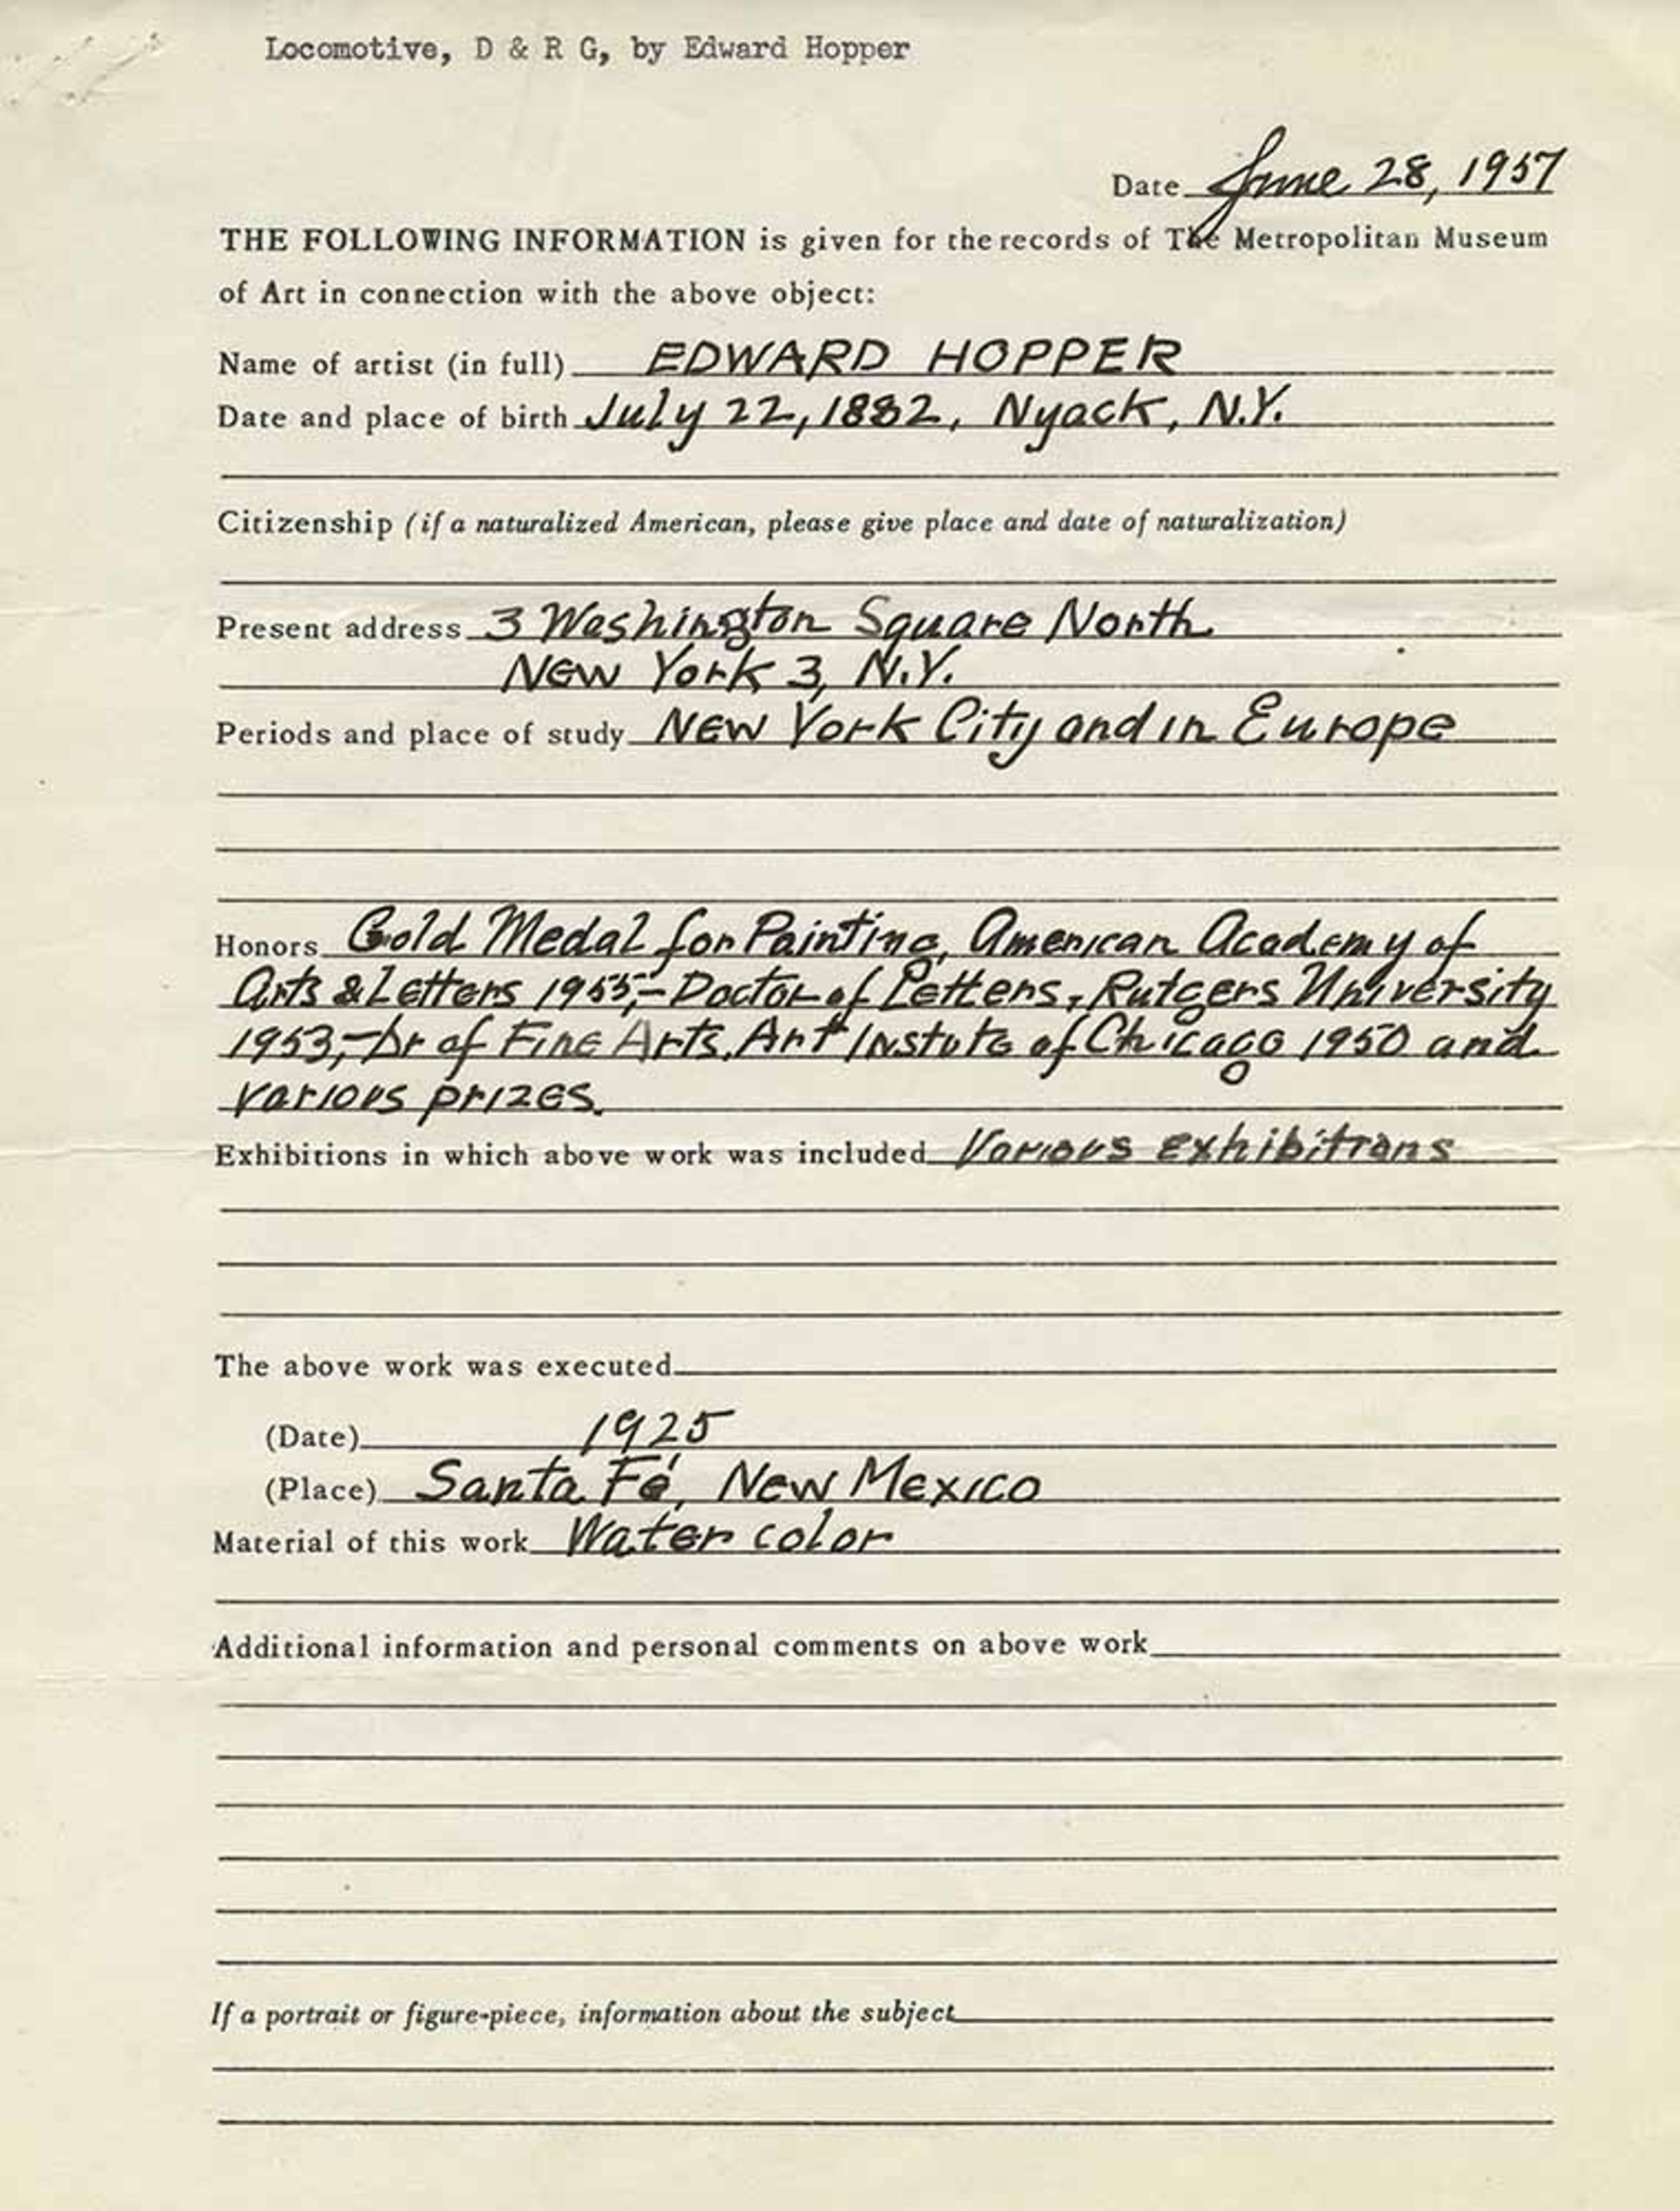 An intake form filled out by artist Edward Hopper